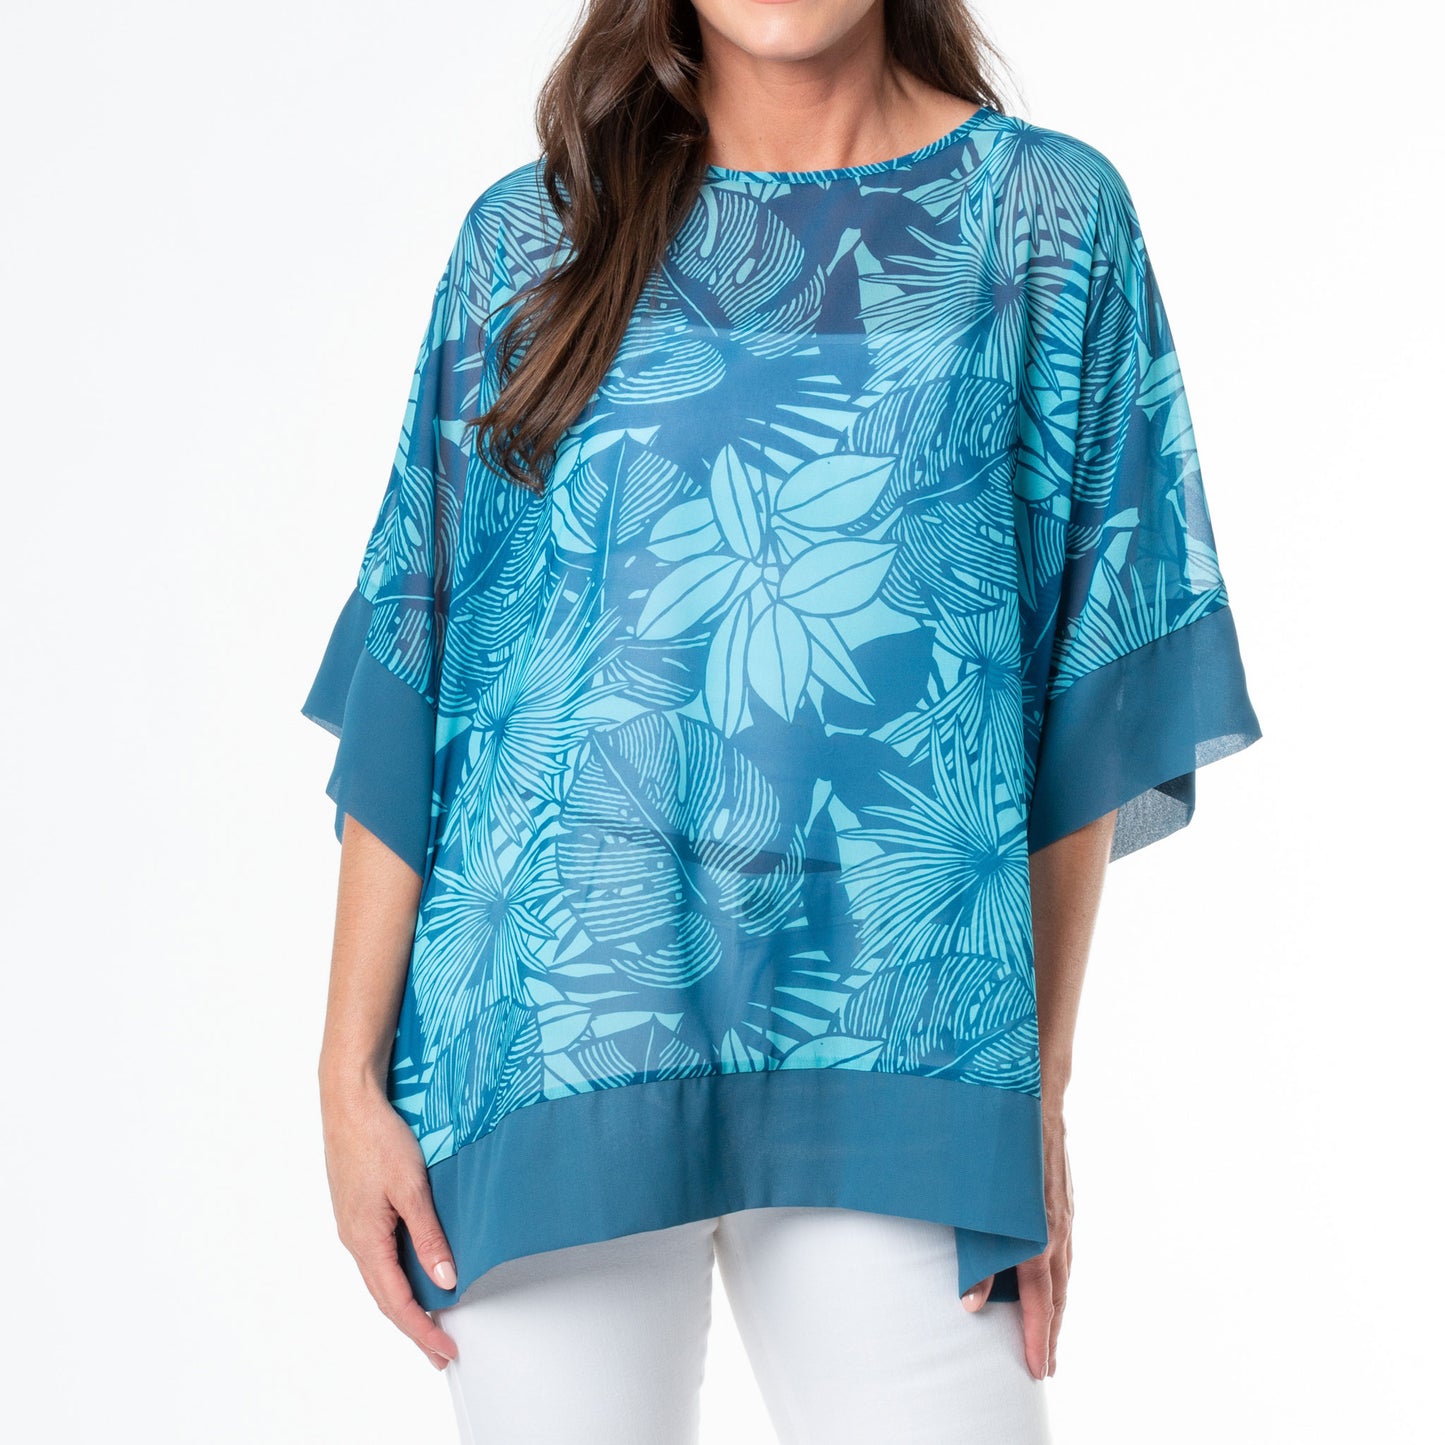 Lexi One Size Sheer Poncho Swimsuit Cover Up